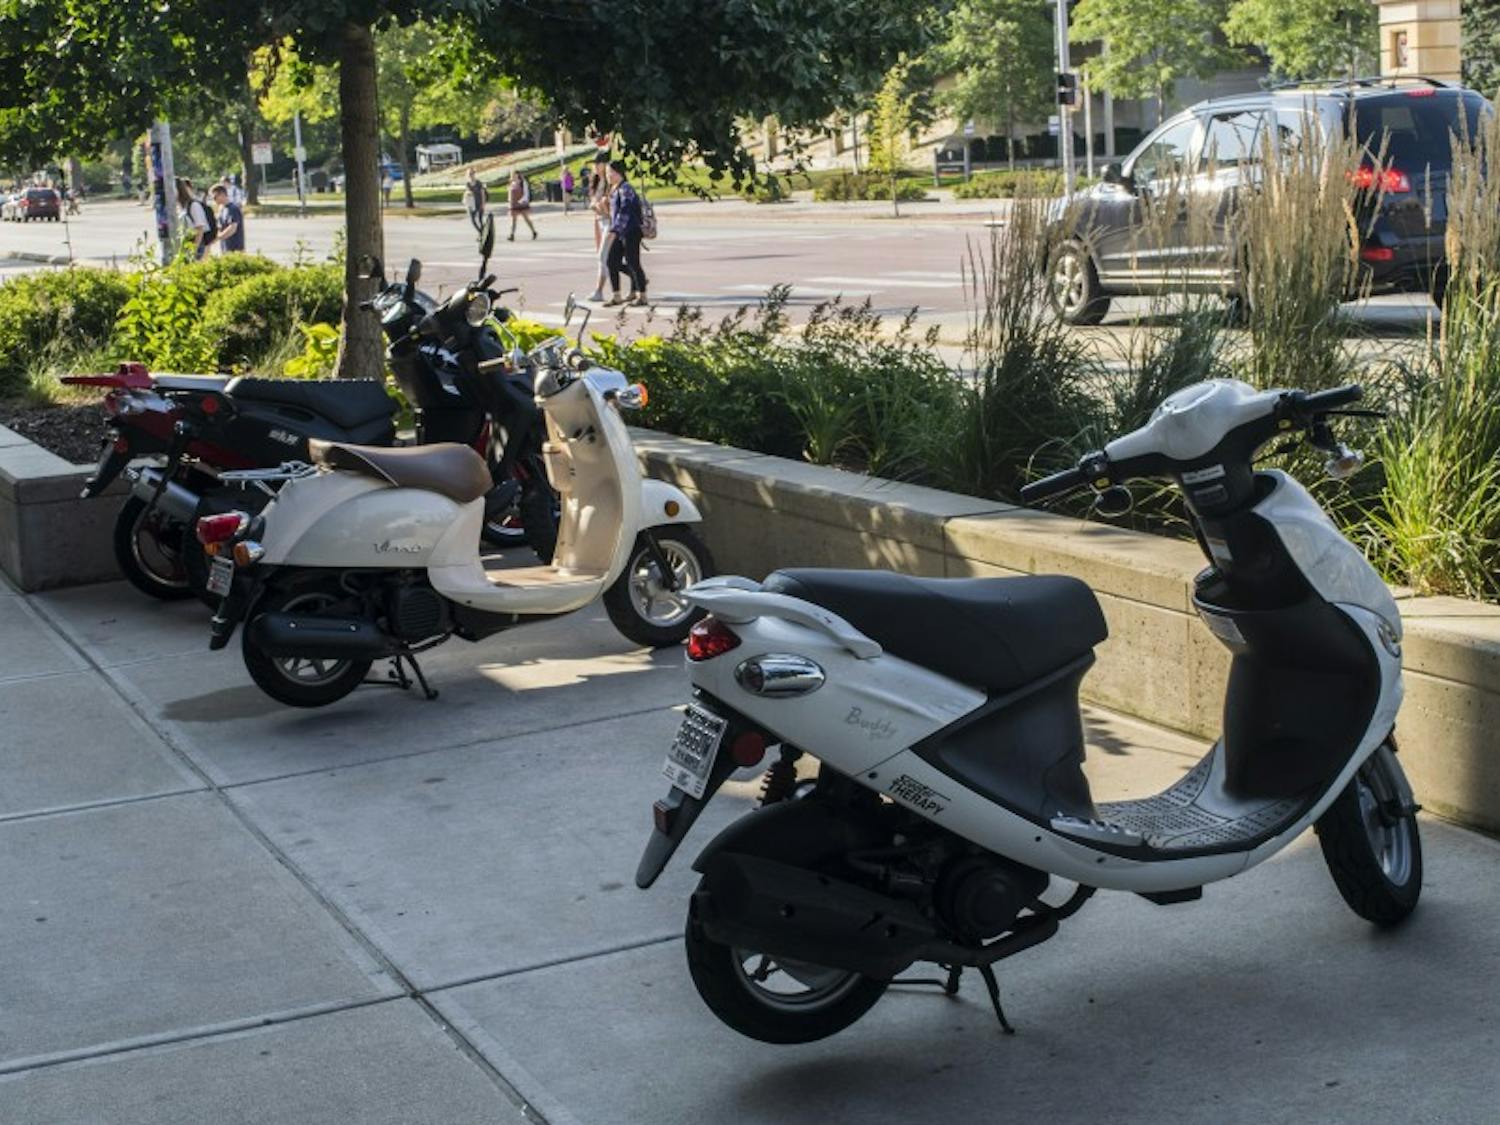 A new city law that takes effect in January will change where mopeds can be parked in Madison.